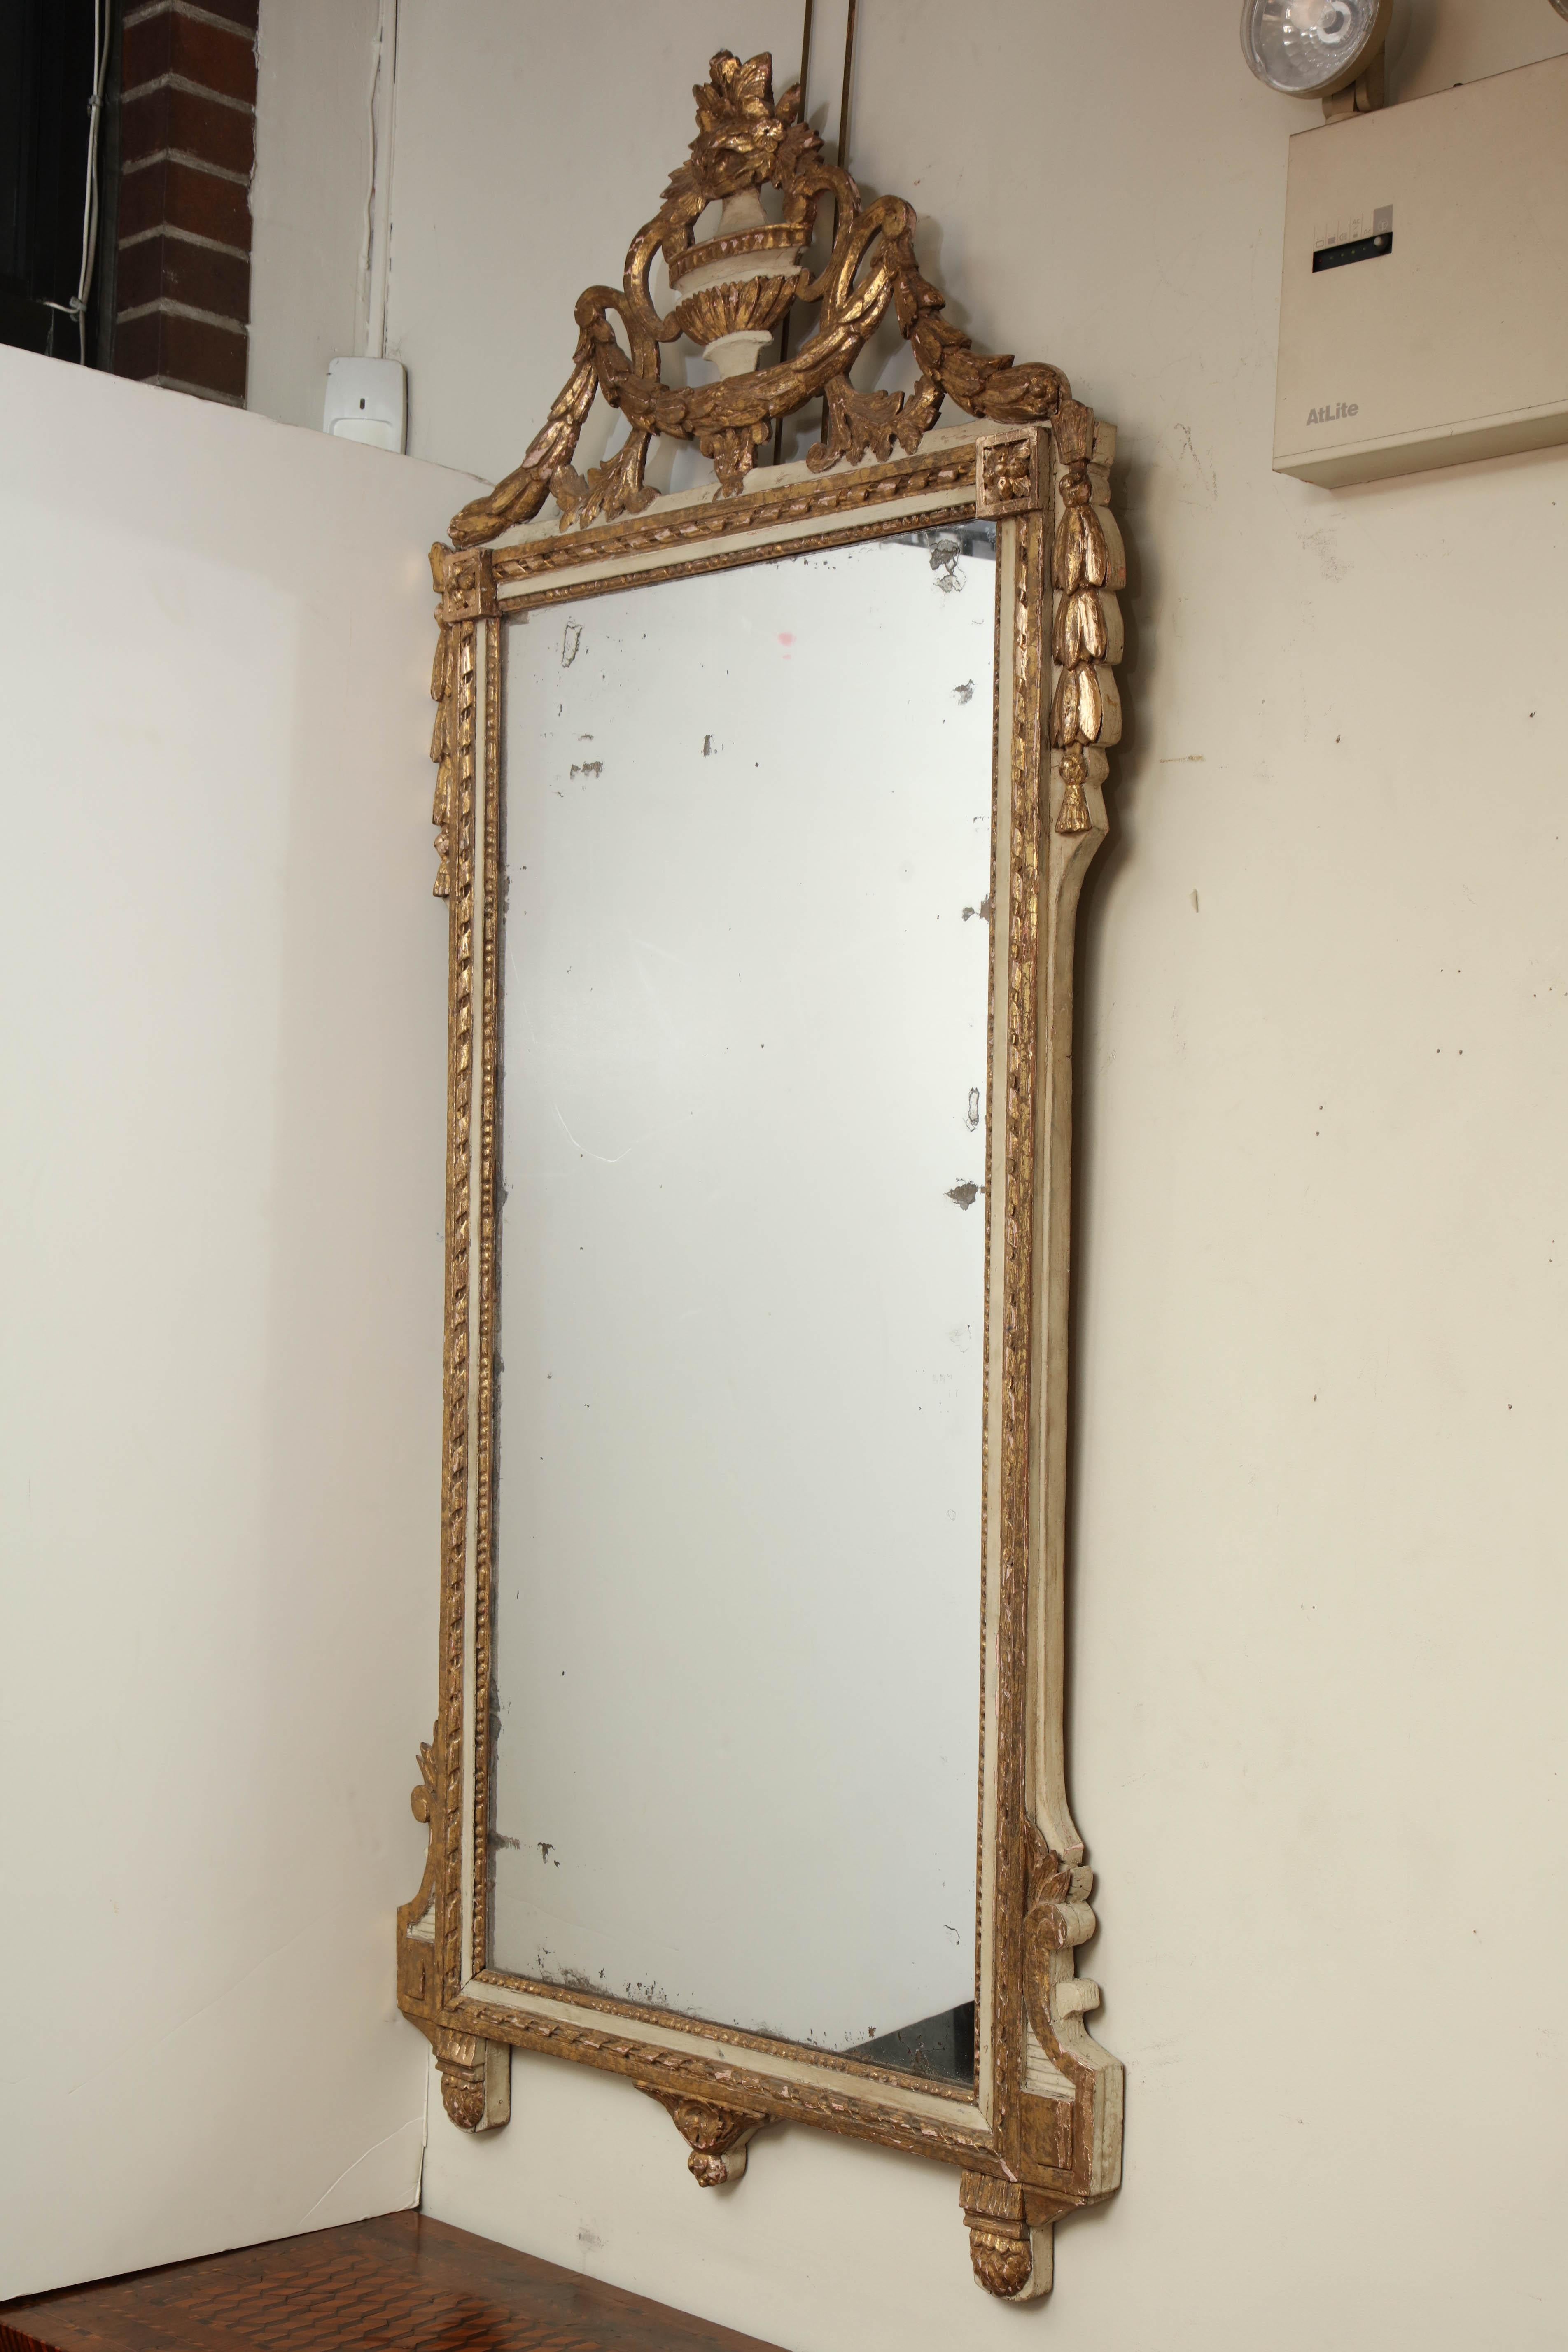 A fine French Louis XVI painted and gilded mirror with a carved floral urn, bellflowers and ribbon frame.